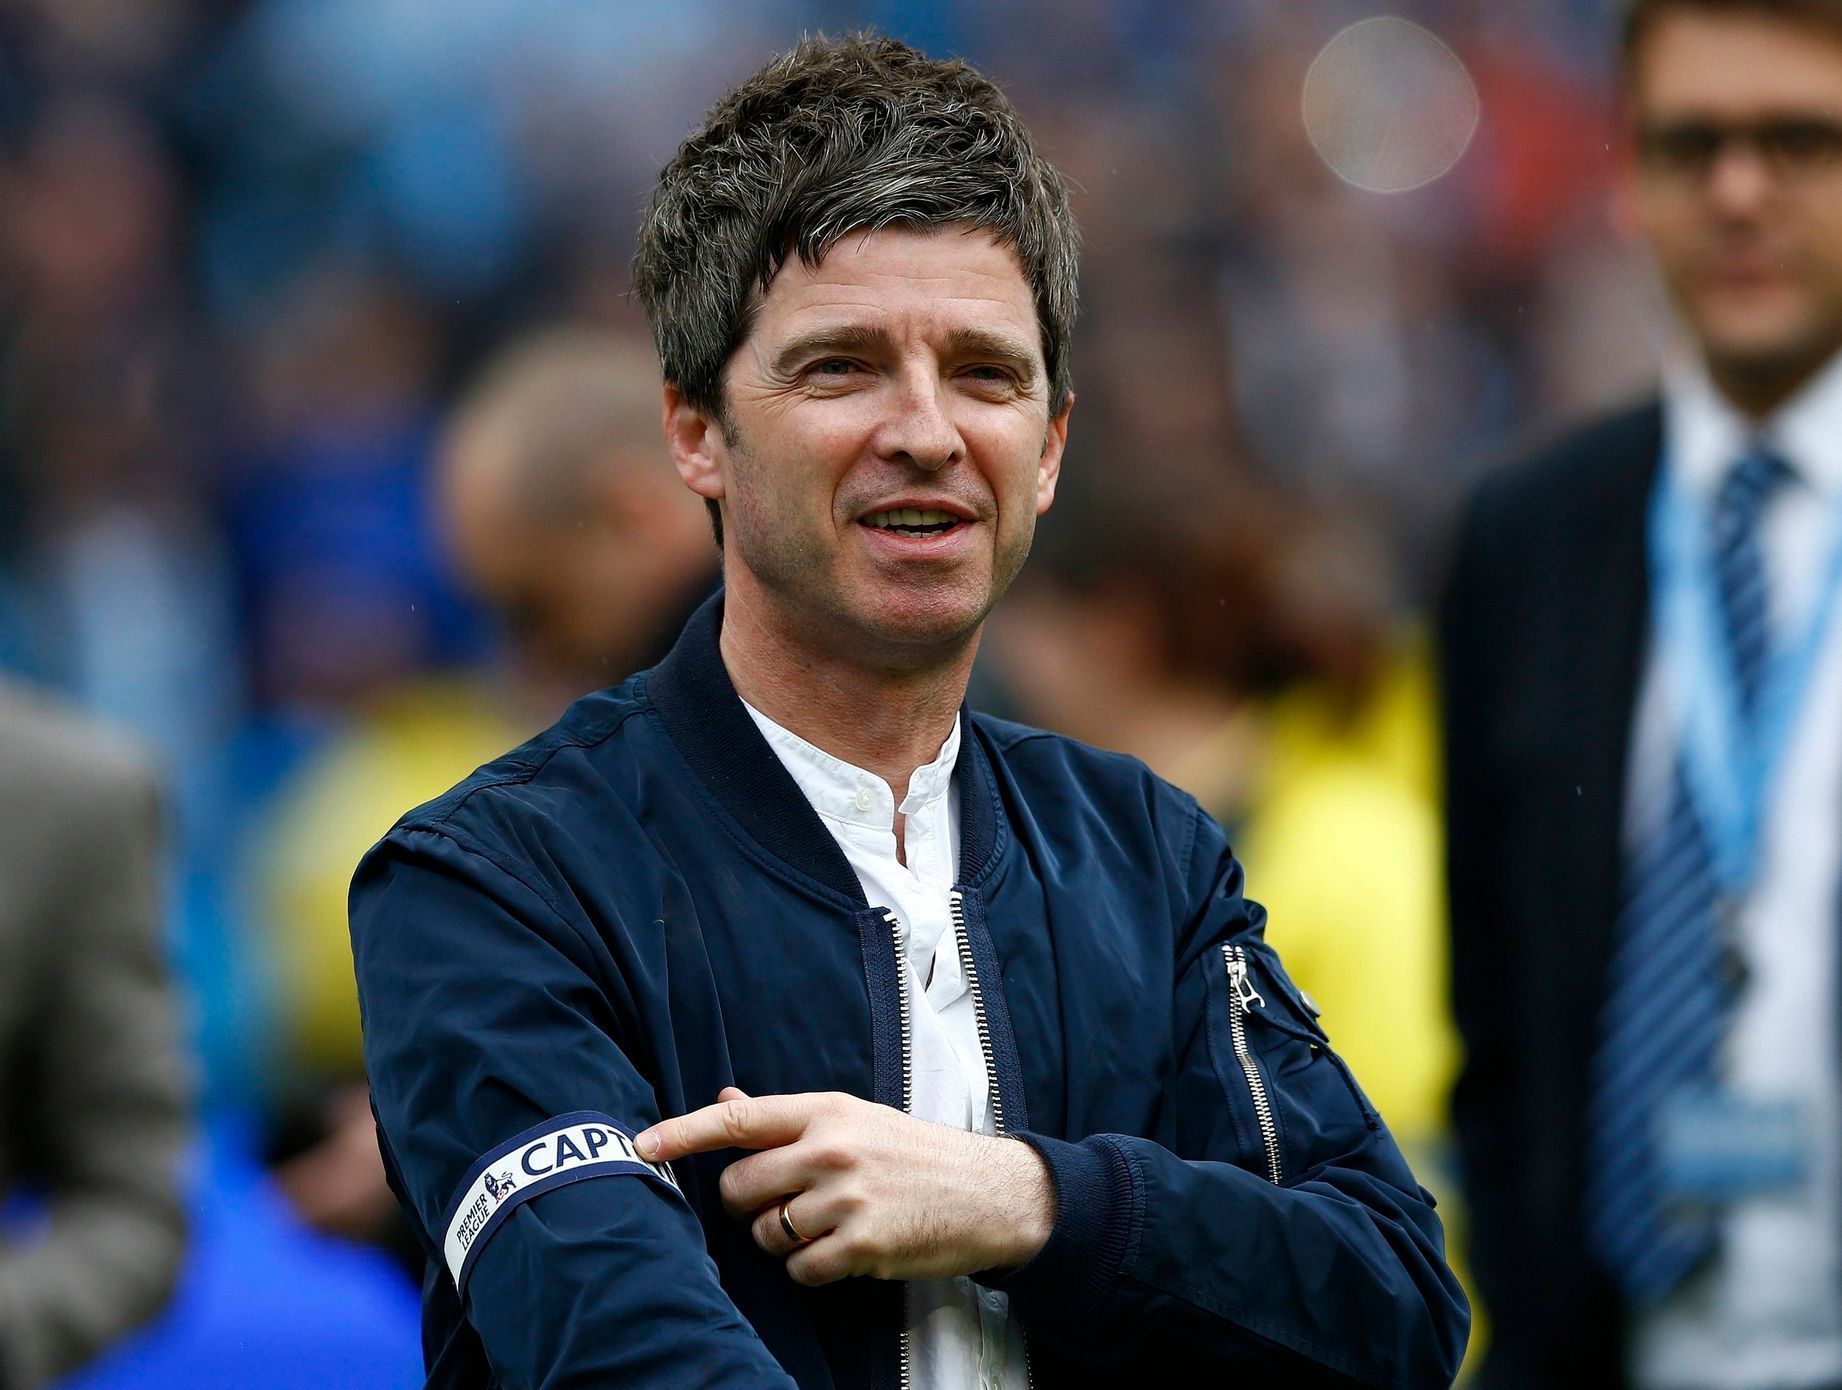 Noel Gallagher singer and Manchester City fan shows off the captains' arm band, given to him by Vincent Kompany,  following their soccer match against West Ham United at the Etihad Stadium in Manchest